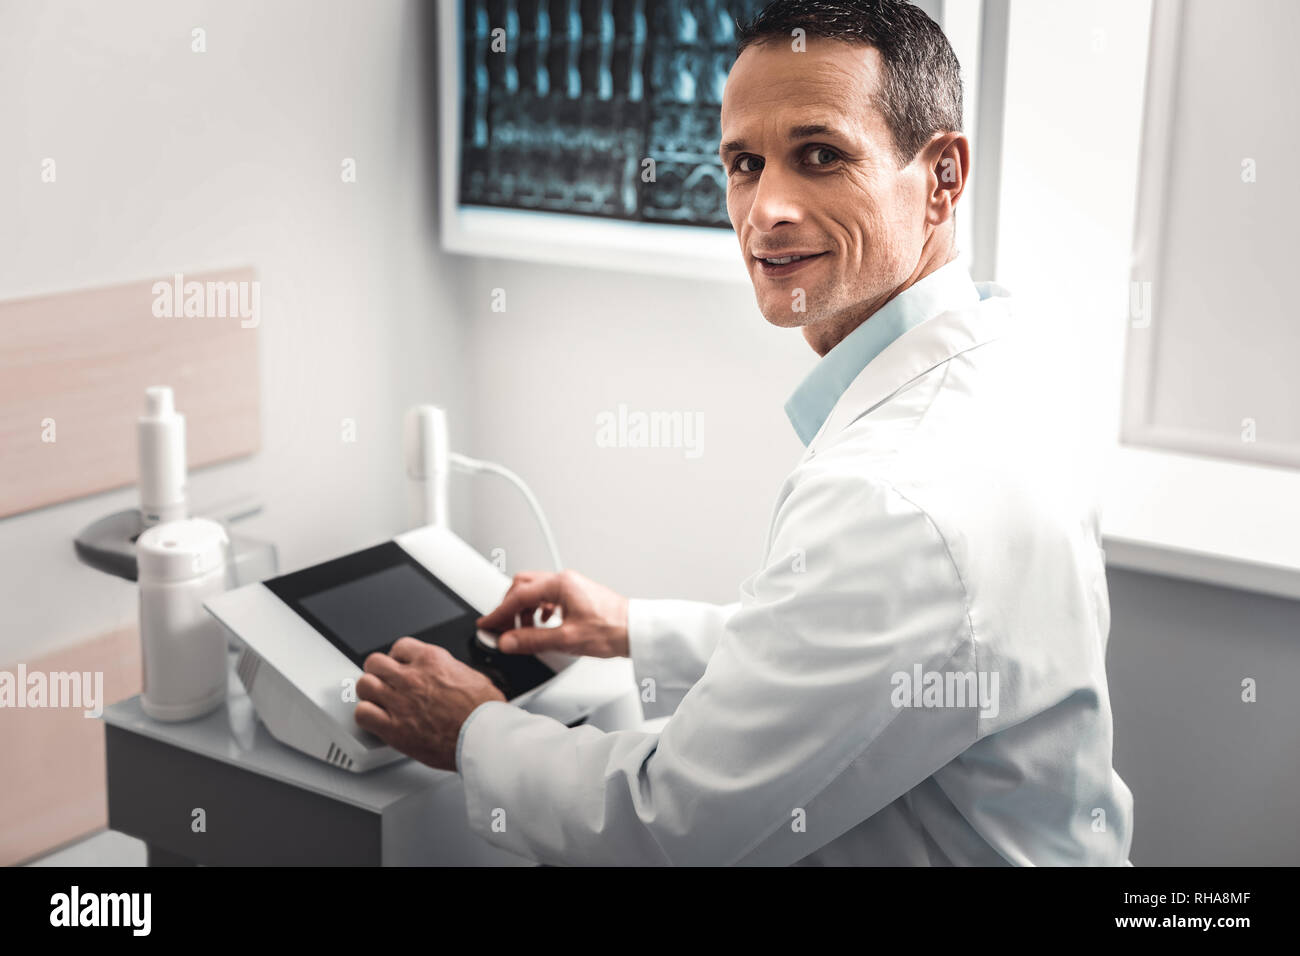 Professional modern chiropractor using medical facilities Stock Photo